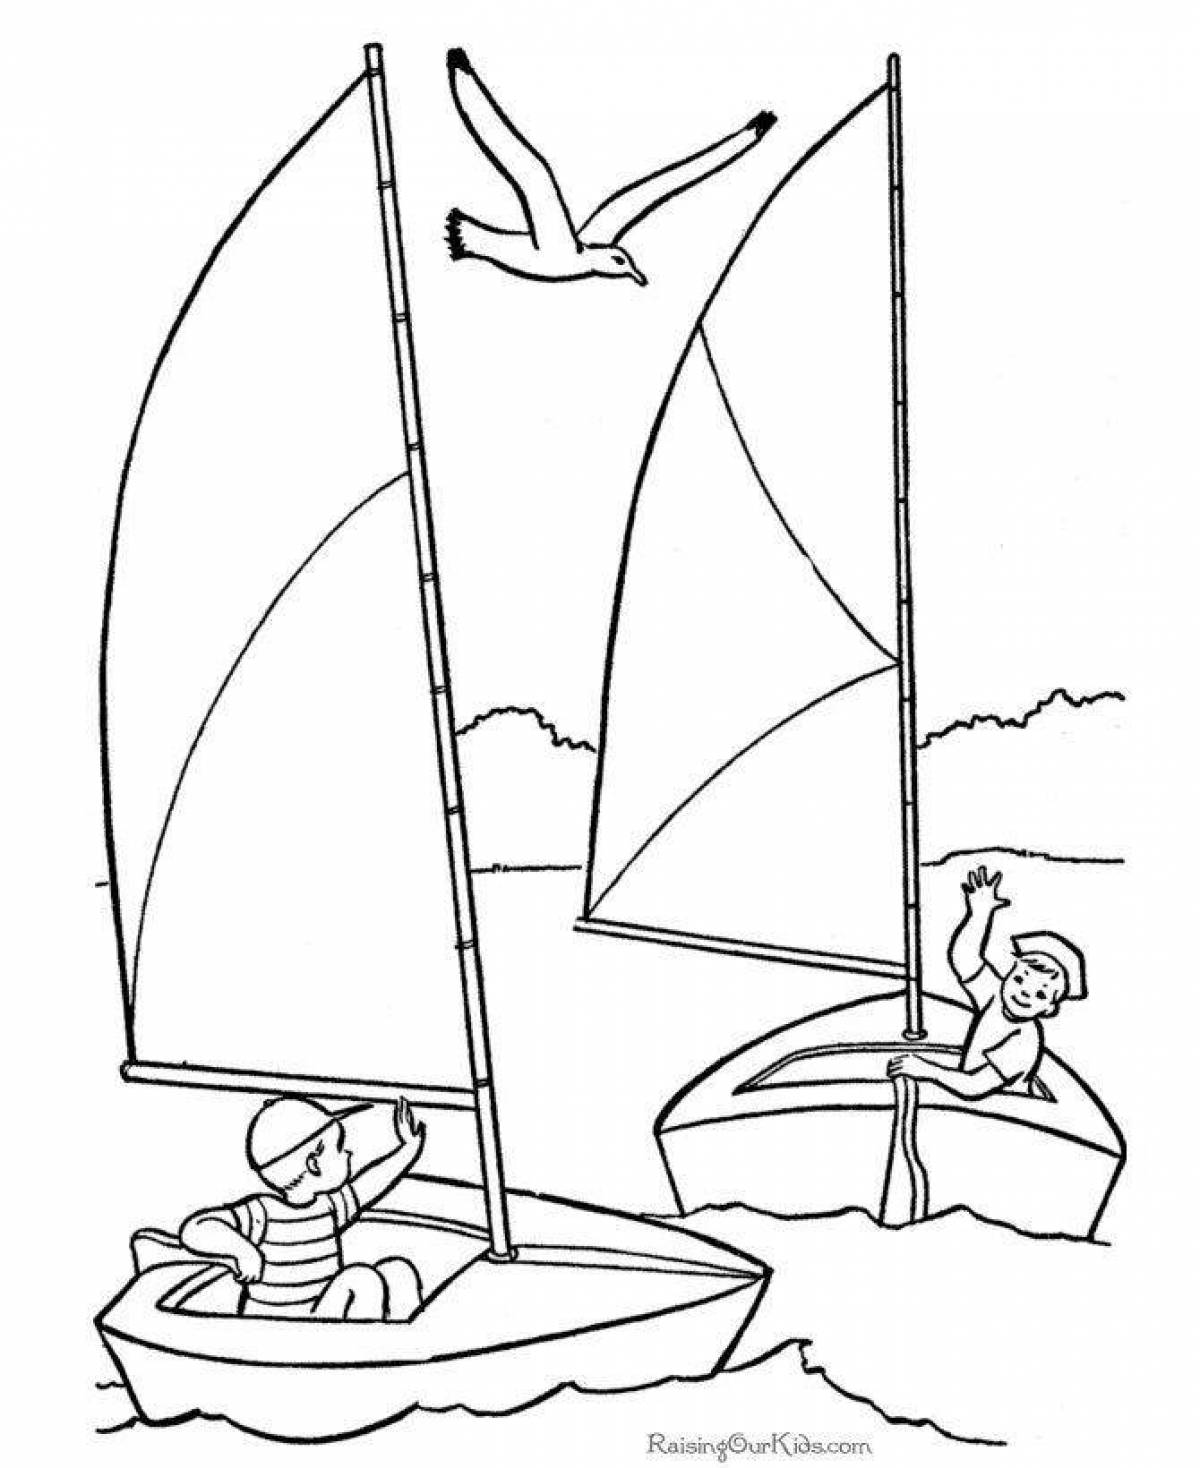 Sailboat live coloring for kids